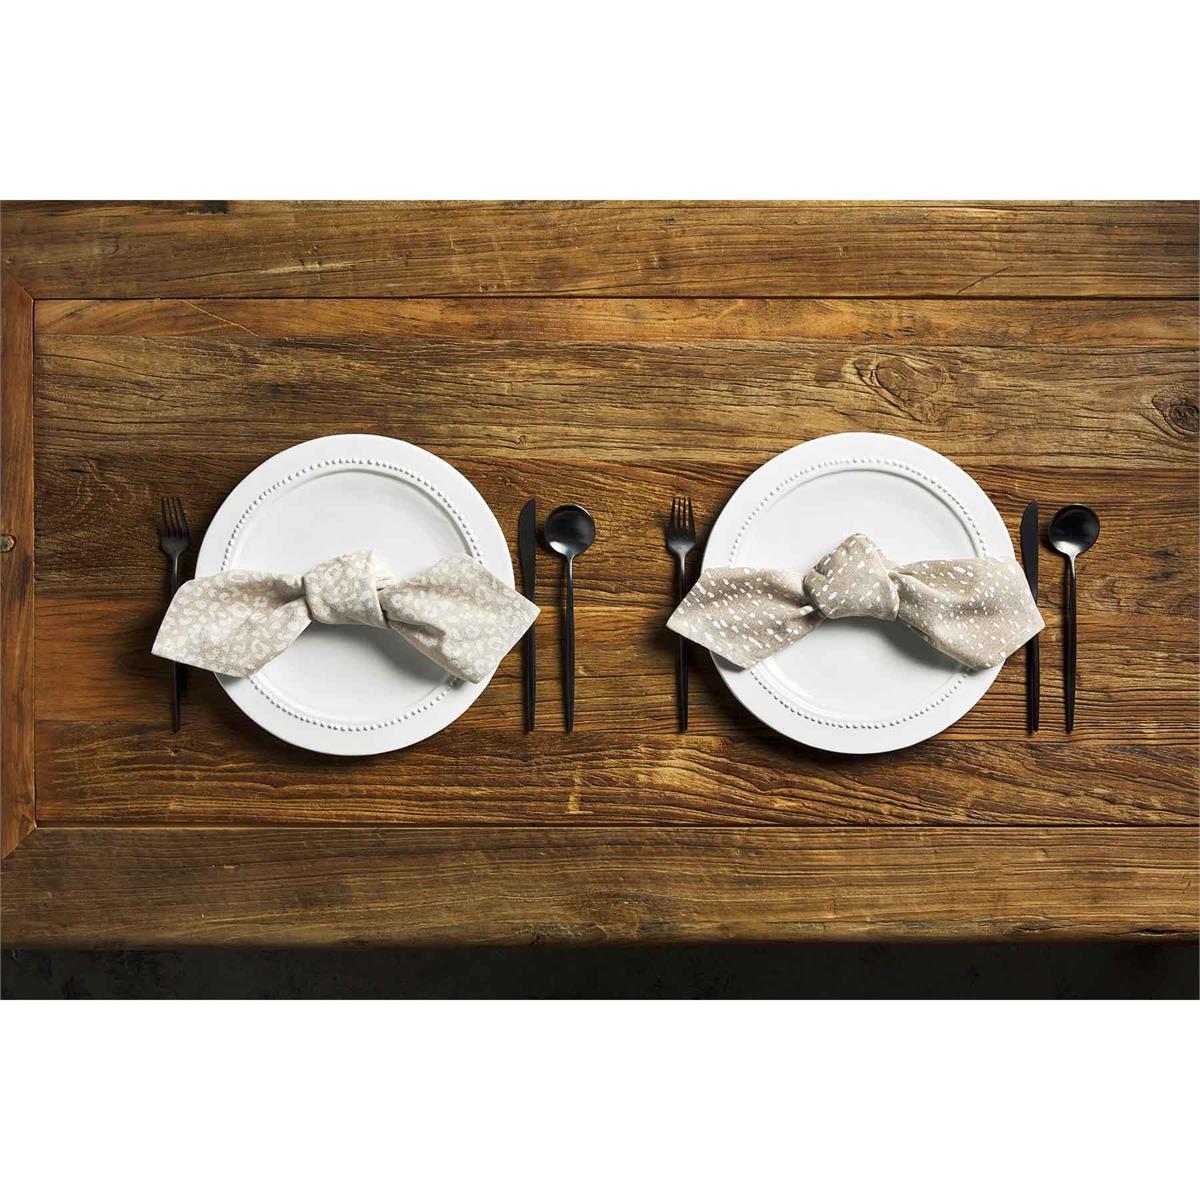 2 place settings on a wooden tabletop includes plates, napkins, and silverware.